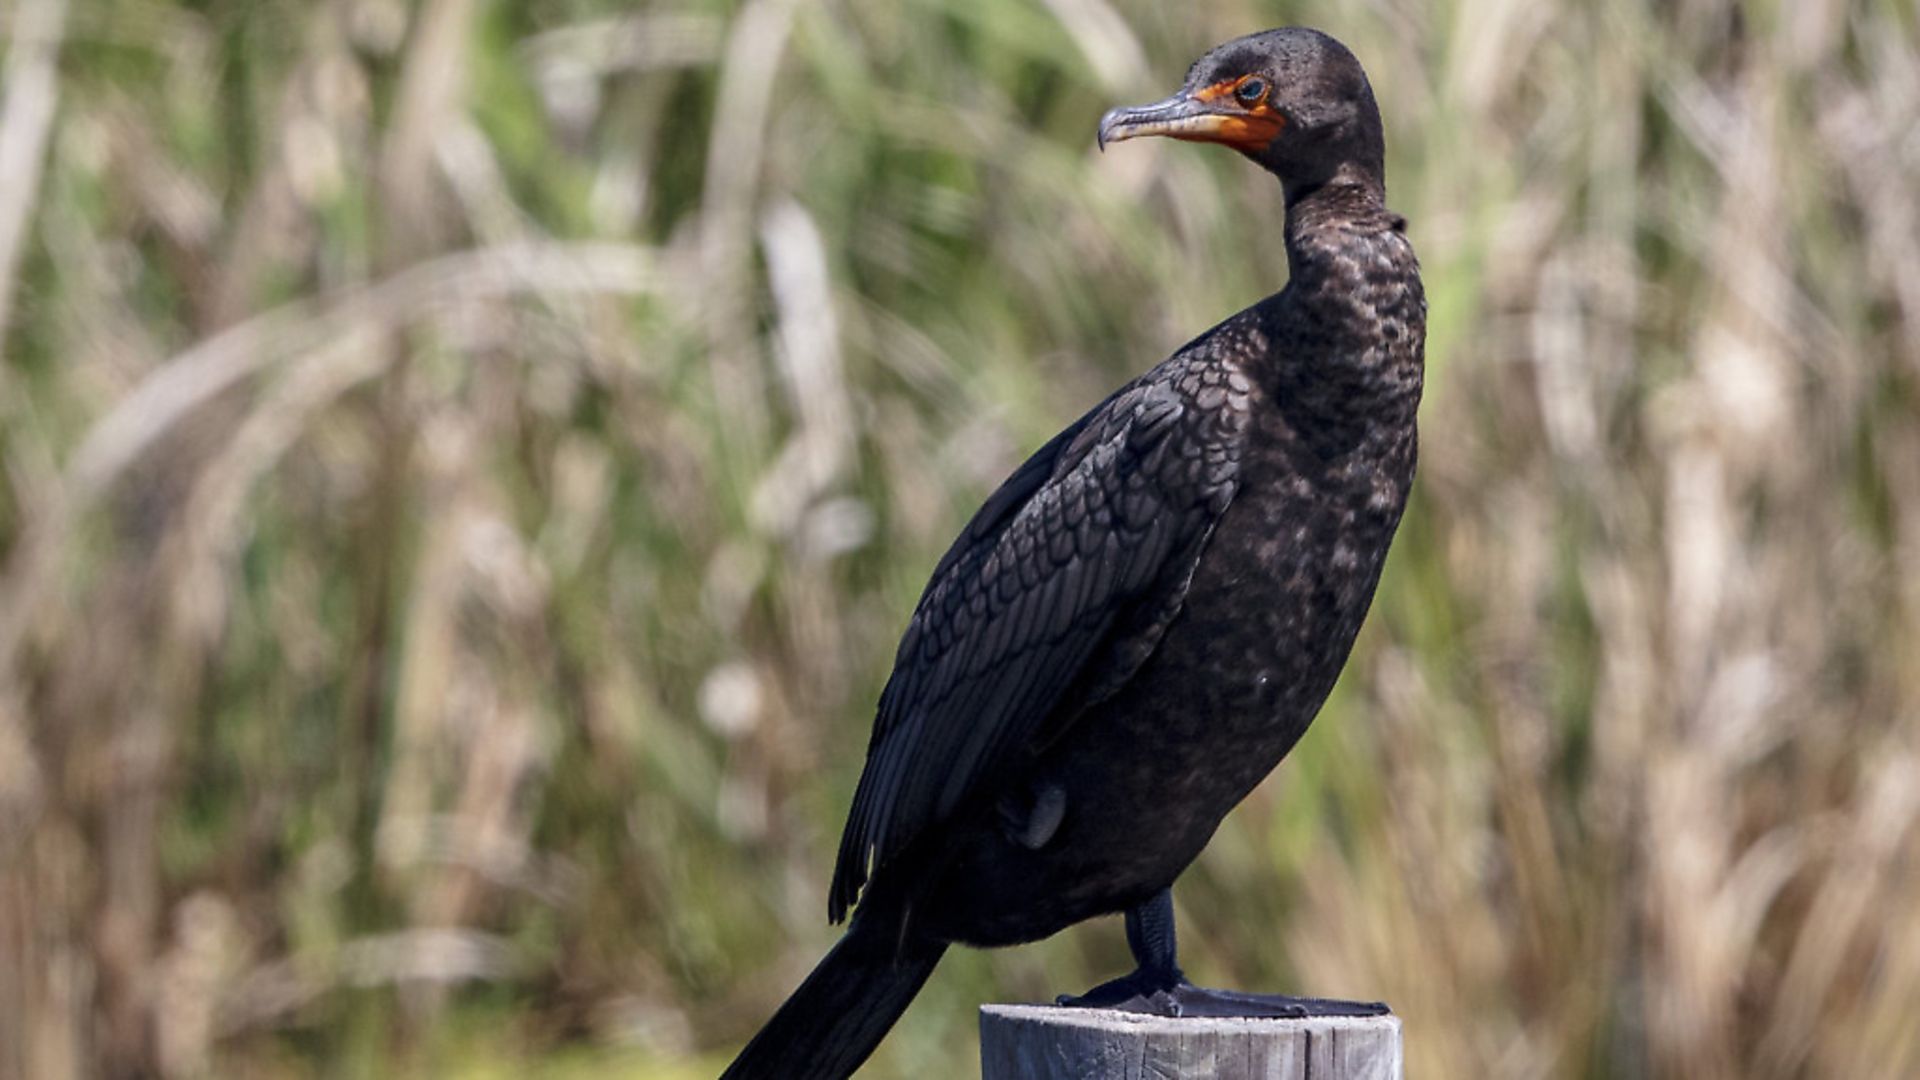 A solitary Double-crested Cormorant perched on top of a wooden piling in a watery marsh - Credit: Getty Images/iStockphoto